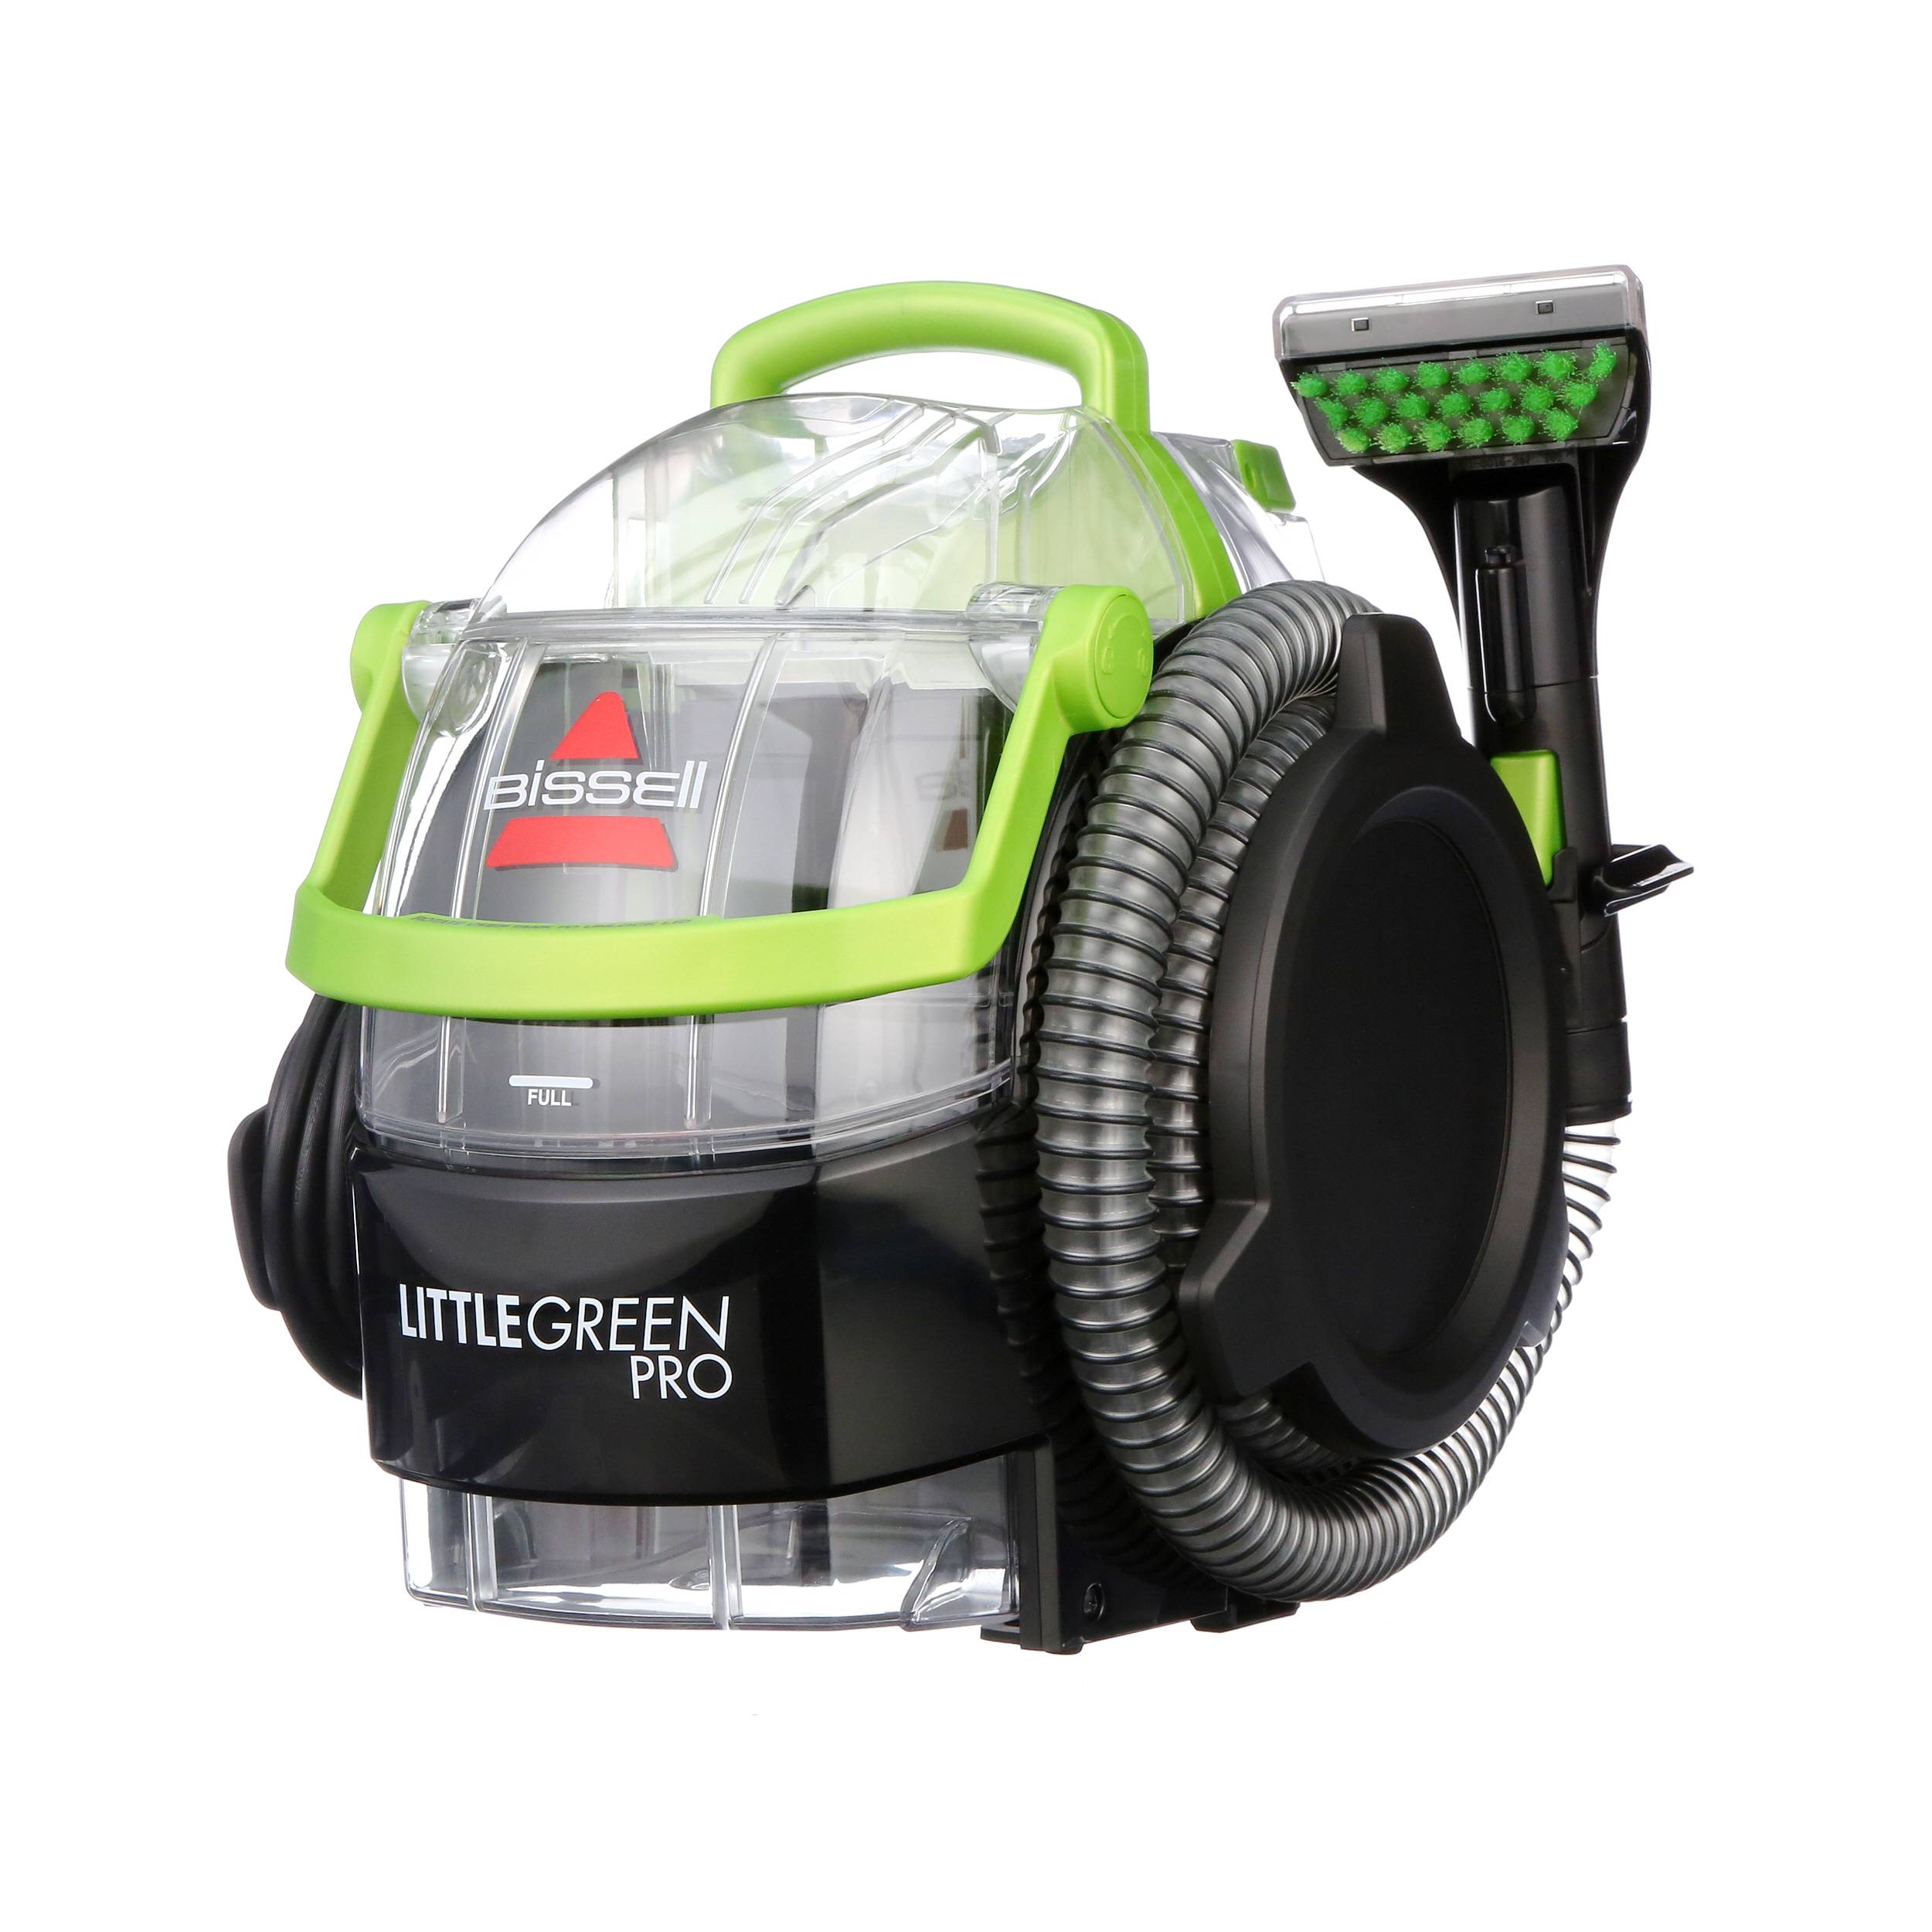 BISSELL Little Green Pro Portable Carpet Cleaner, 2505 